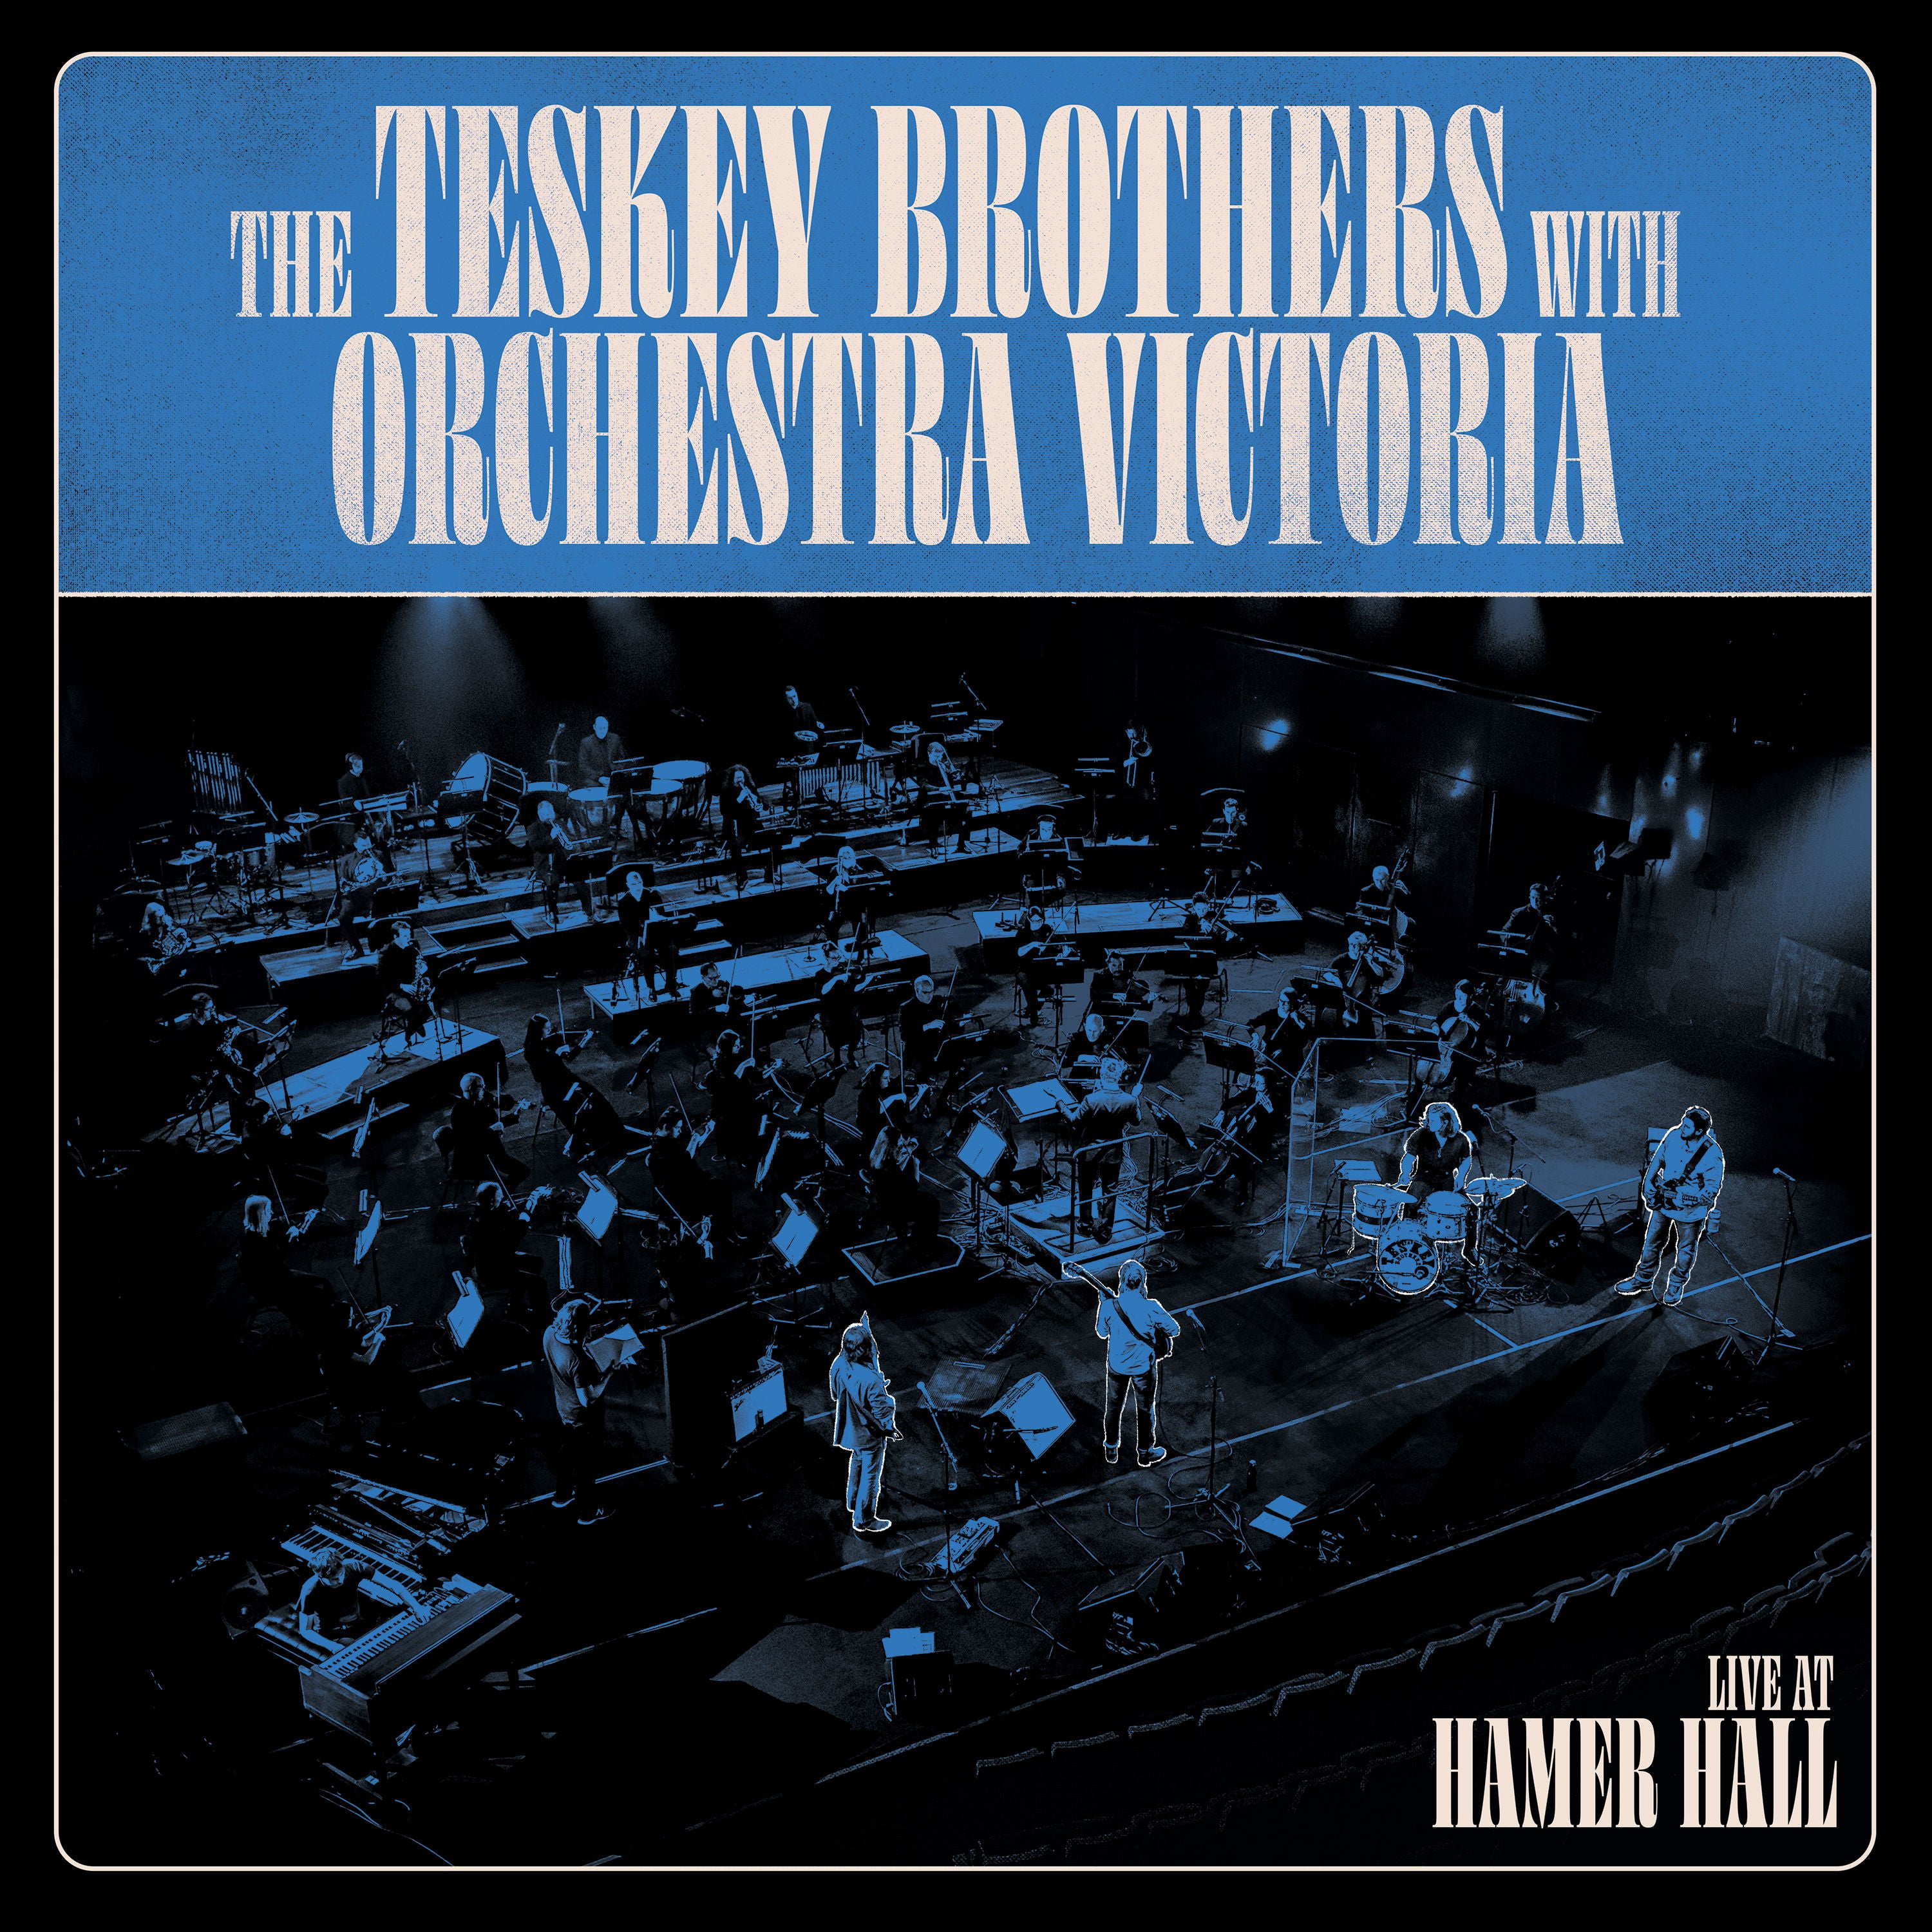 The Teskey Brothers, Orchestra Victoria - Live at Hamer Hall: CD